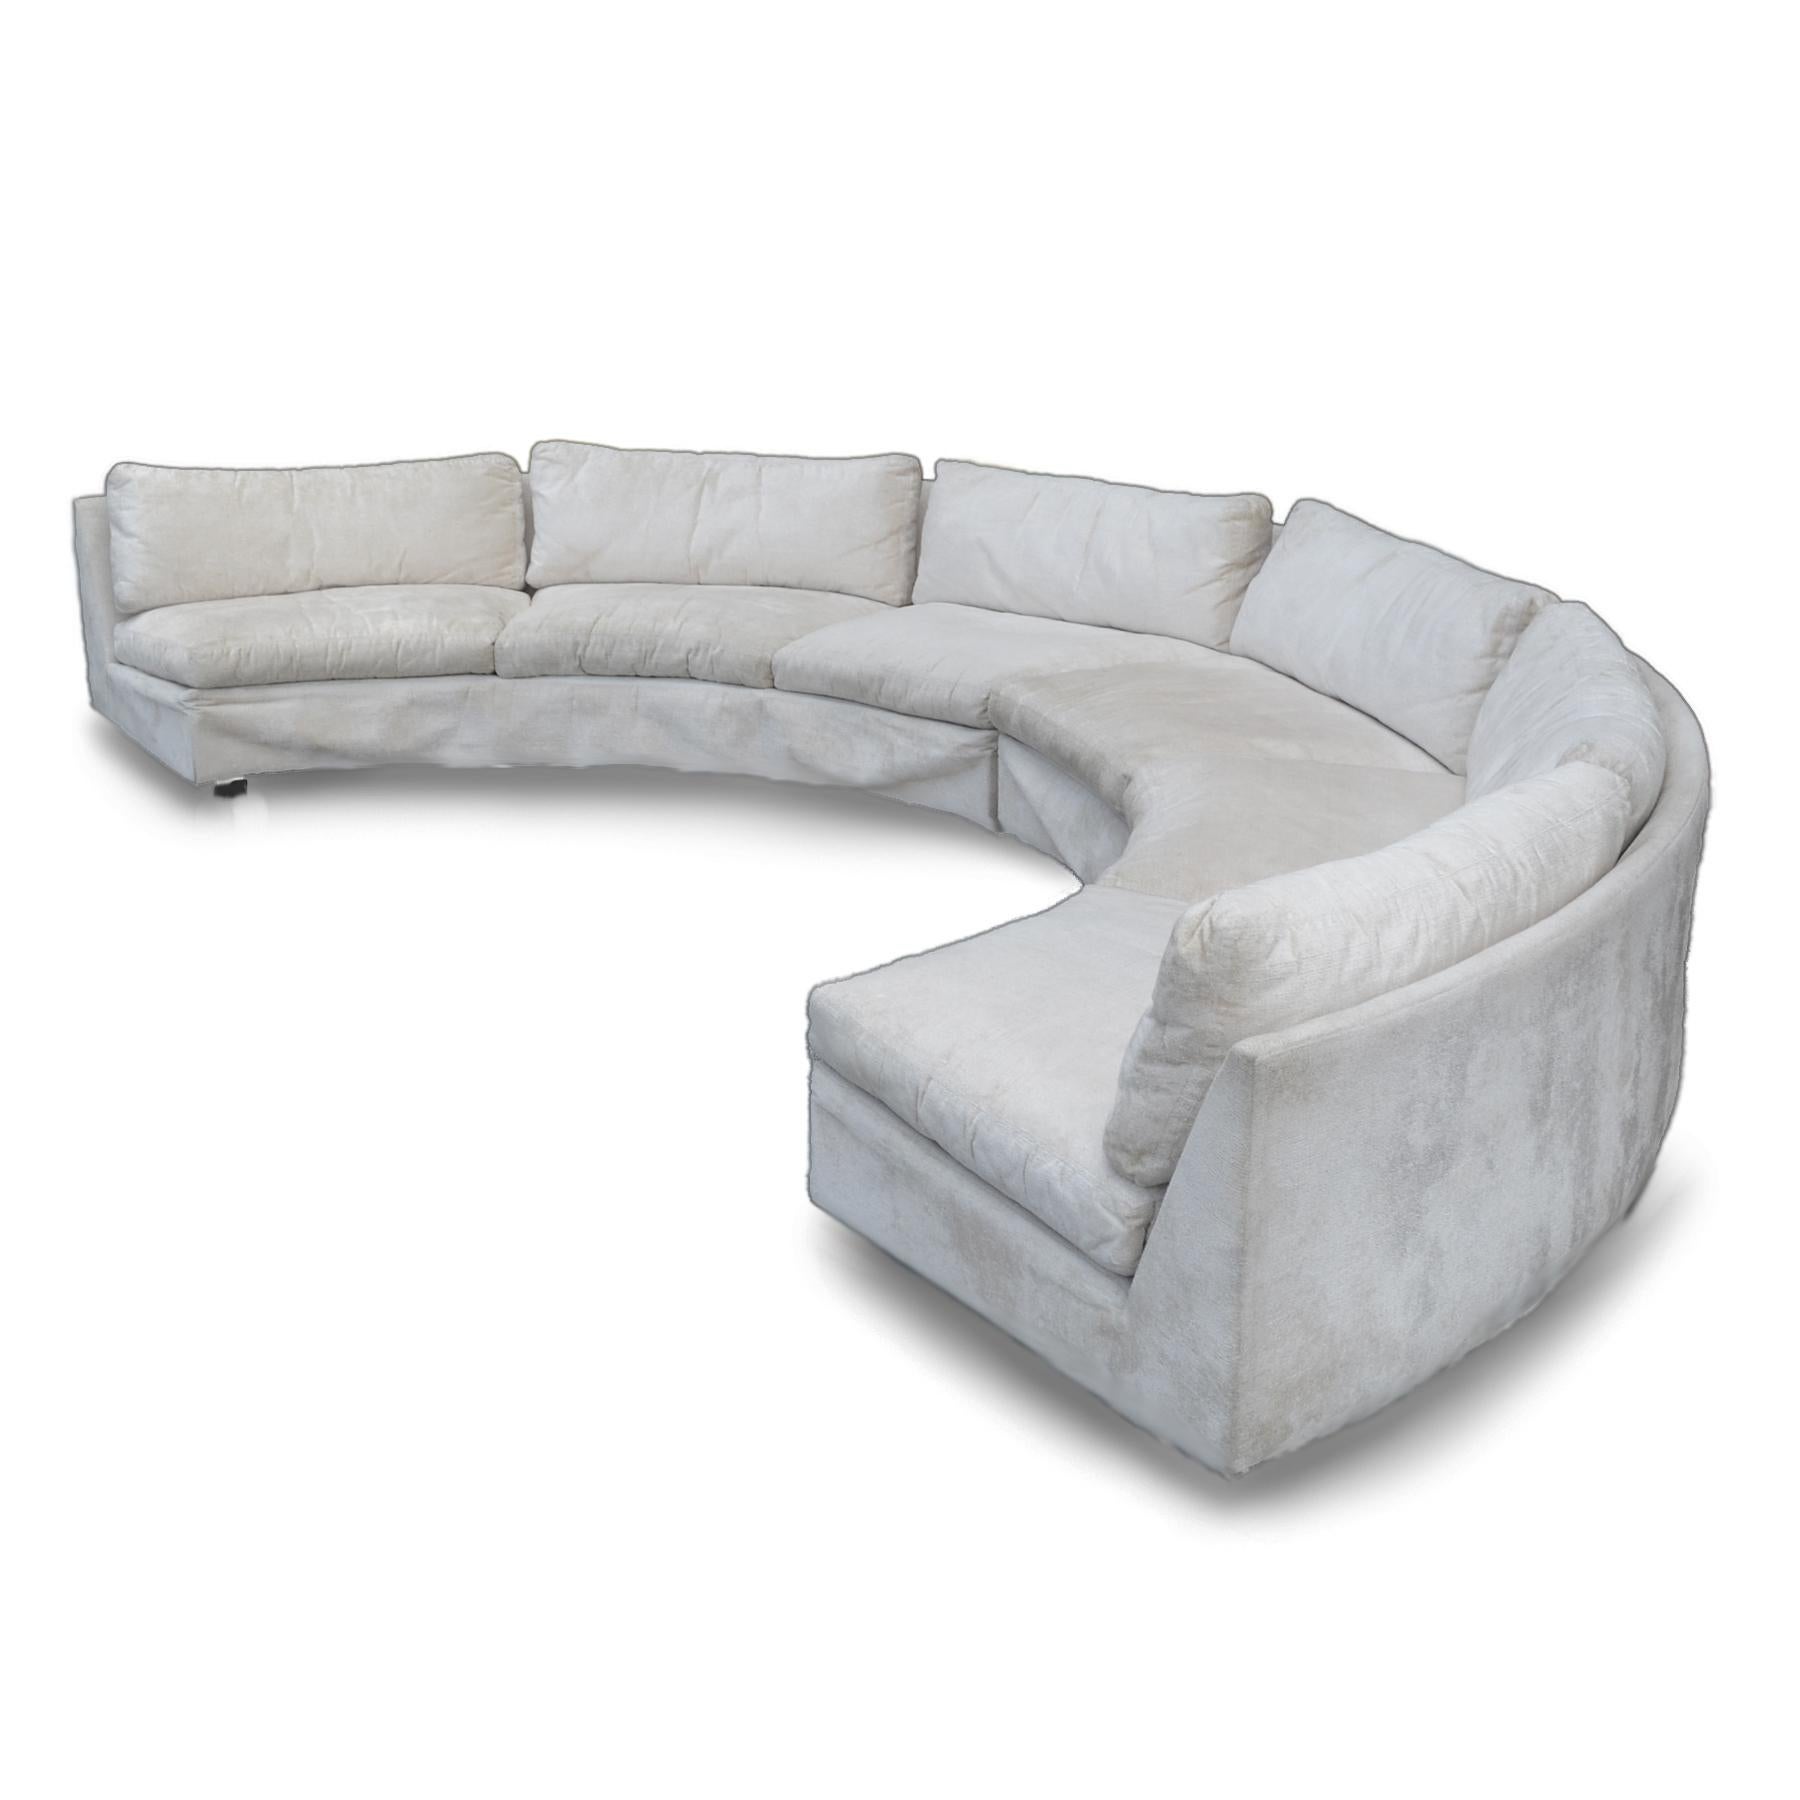 This big, sexy Baughman sofa is a two-piece, which when used together, form a semi-circular shape that is supported by square black legs. It's in good condition for its age, though the original upholstery could use some restoration. The original